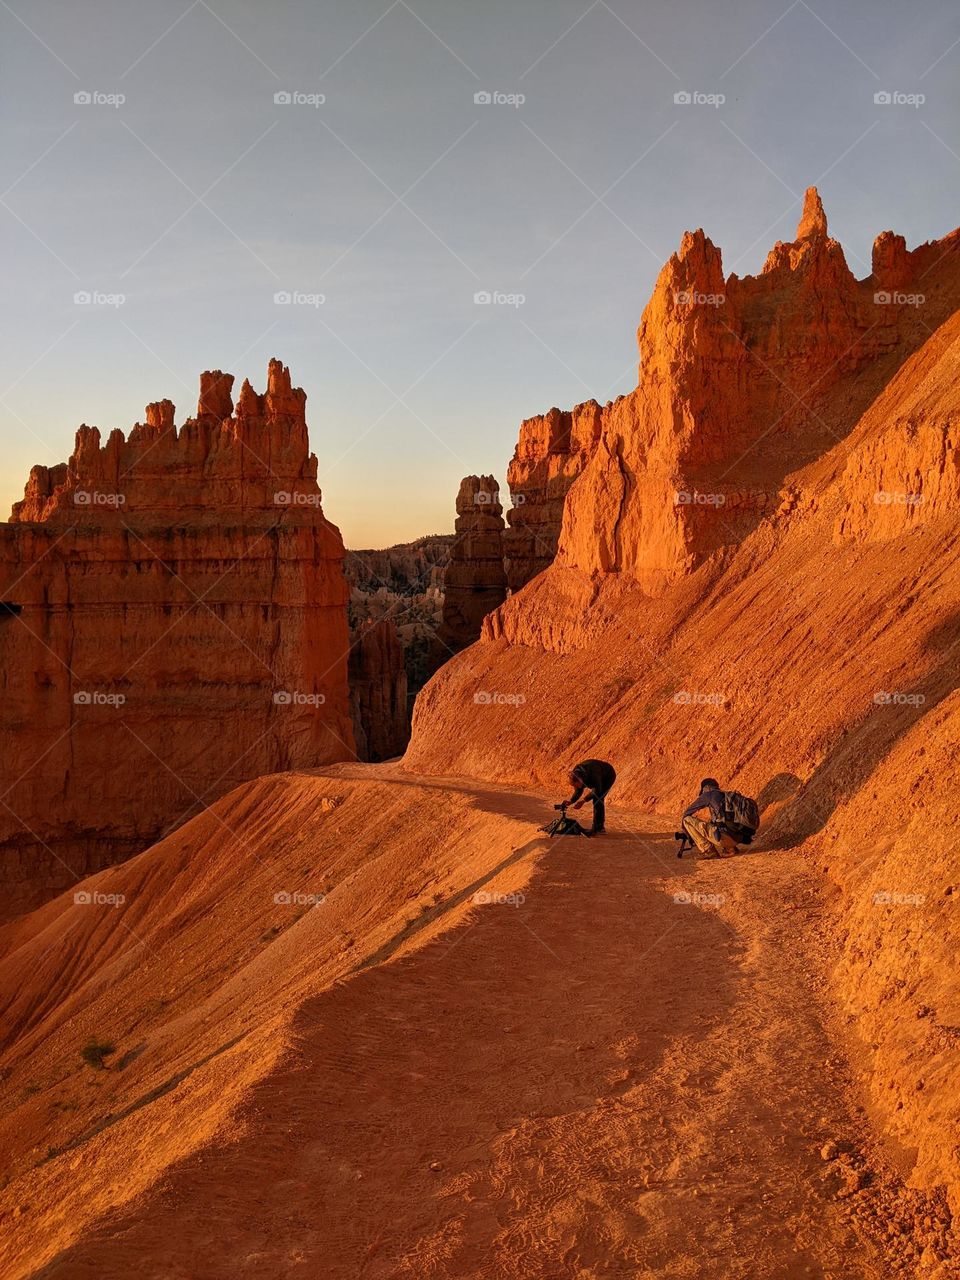 Catching the money shot at sunrise in Bryce Canyon.